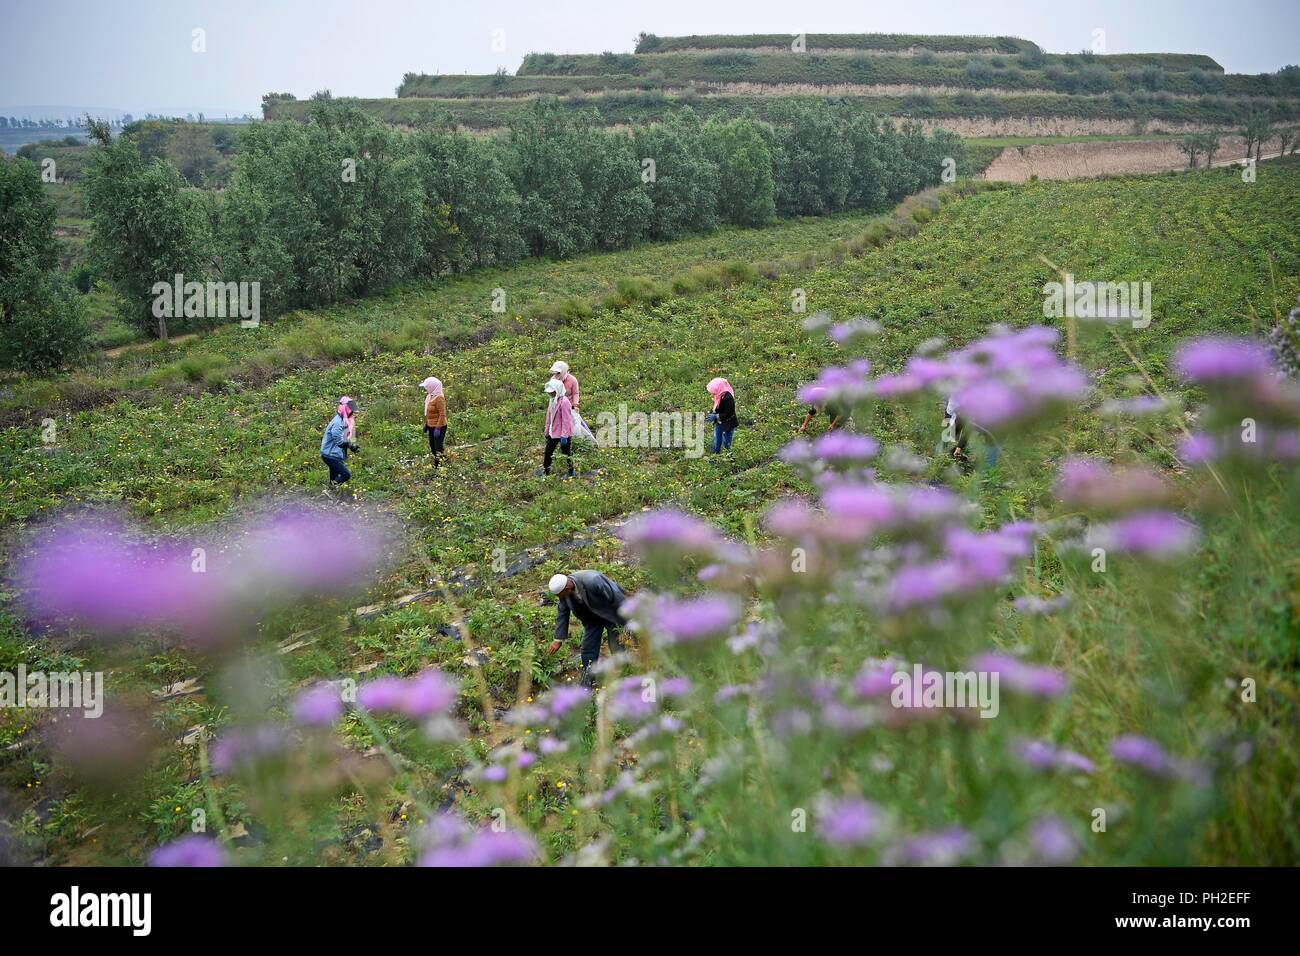 (180830) -- GUYUAN, Aug. 30, 2018 (Xinhua) -- Farmers pick peony flower seeds for oil manufacturing at a planting base in Yuanzhou District of Guyuan City, northwest China's Ningxia Hui Autonomous Region, Aug. 28, 2018. Yuanzhou government started to cooperate with the peony seed oil company Ruidanyuan in 2014 to establish a peony planting base for processing and production of peony products on barren mountains. So far, the planting base has created over 300 job opportunities for impoverished locals and achieved sound improvements on environmental protection. (Xinhua/Wang Peng) (hxy) Stock Photo